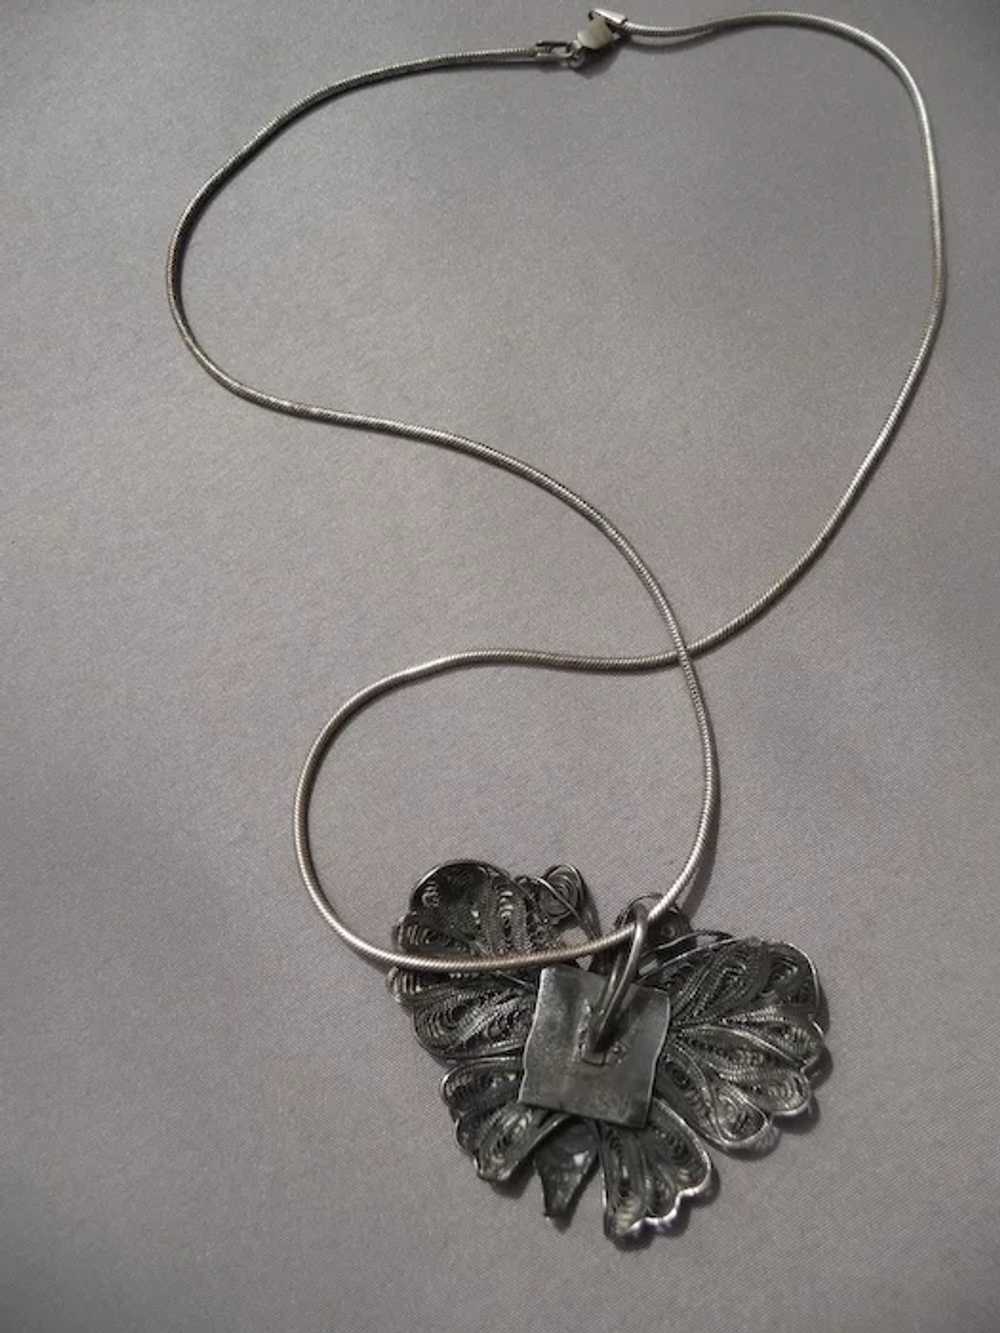 Silver Filigree Butterfly Necklace/Pendant - image 3